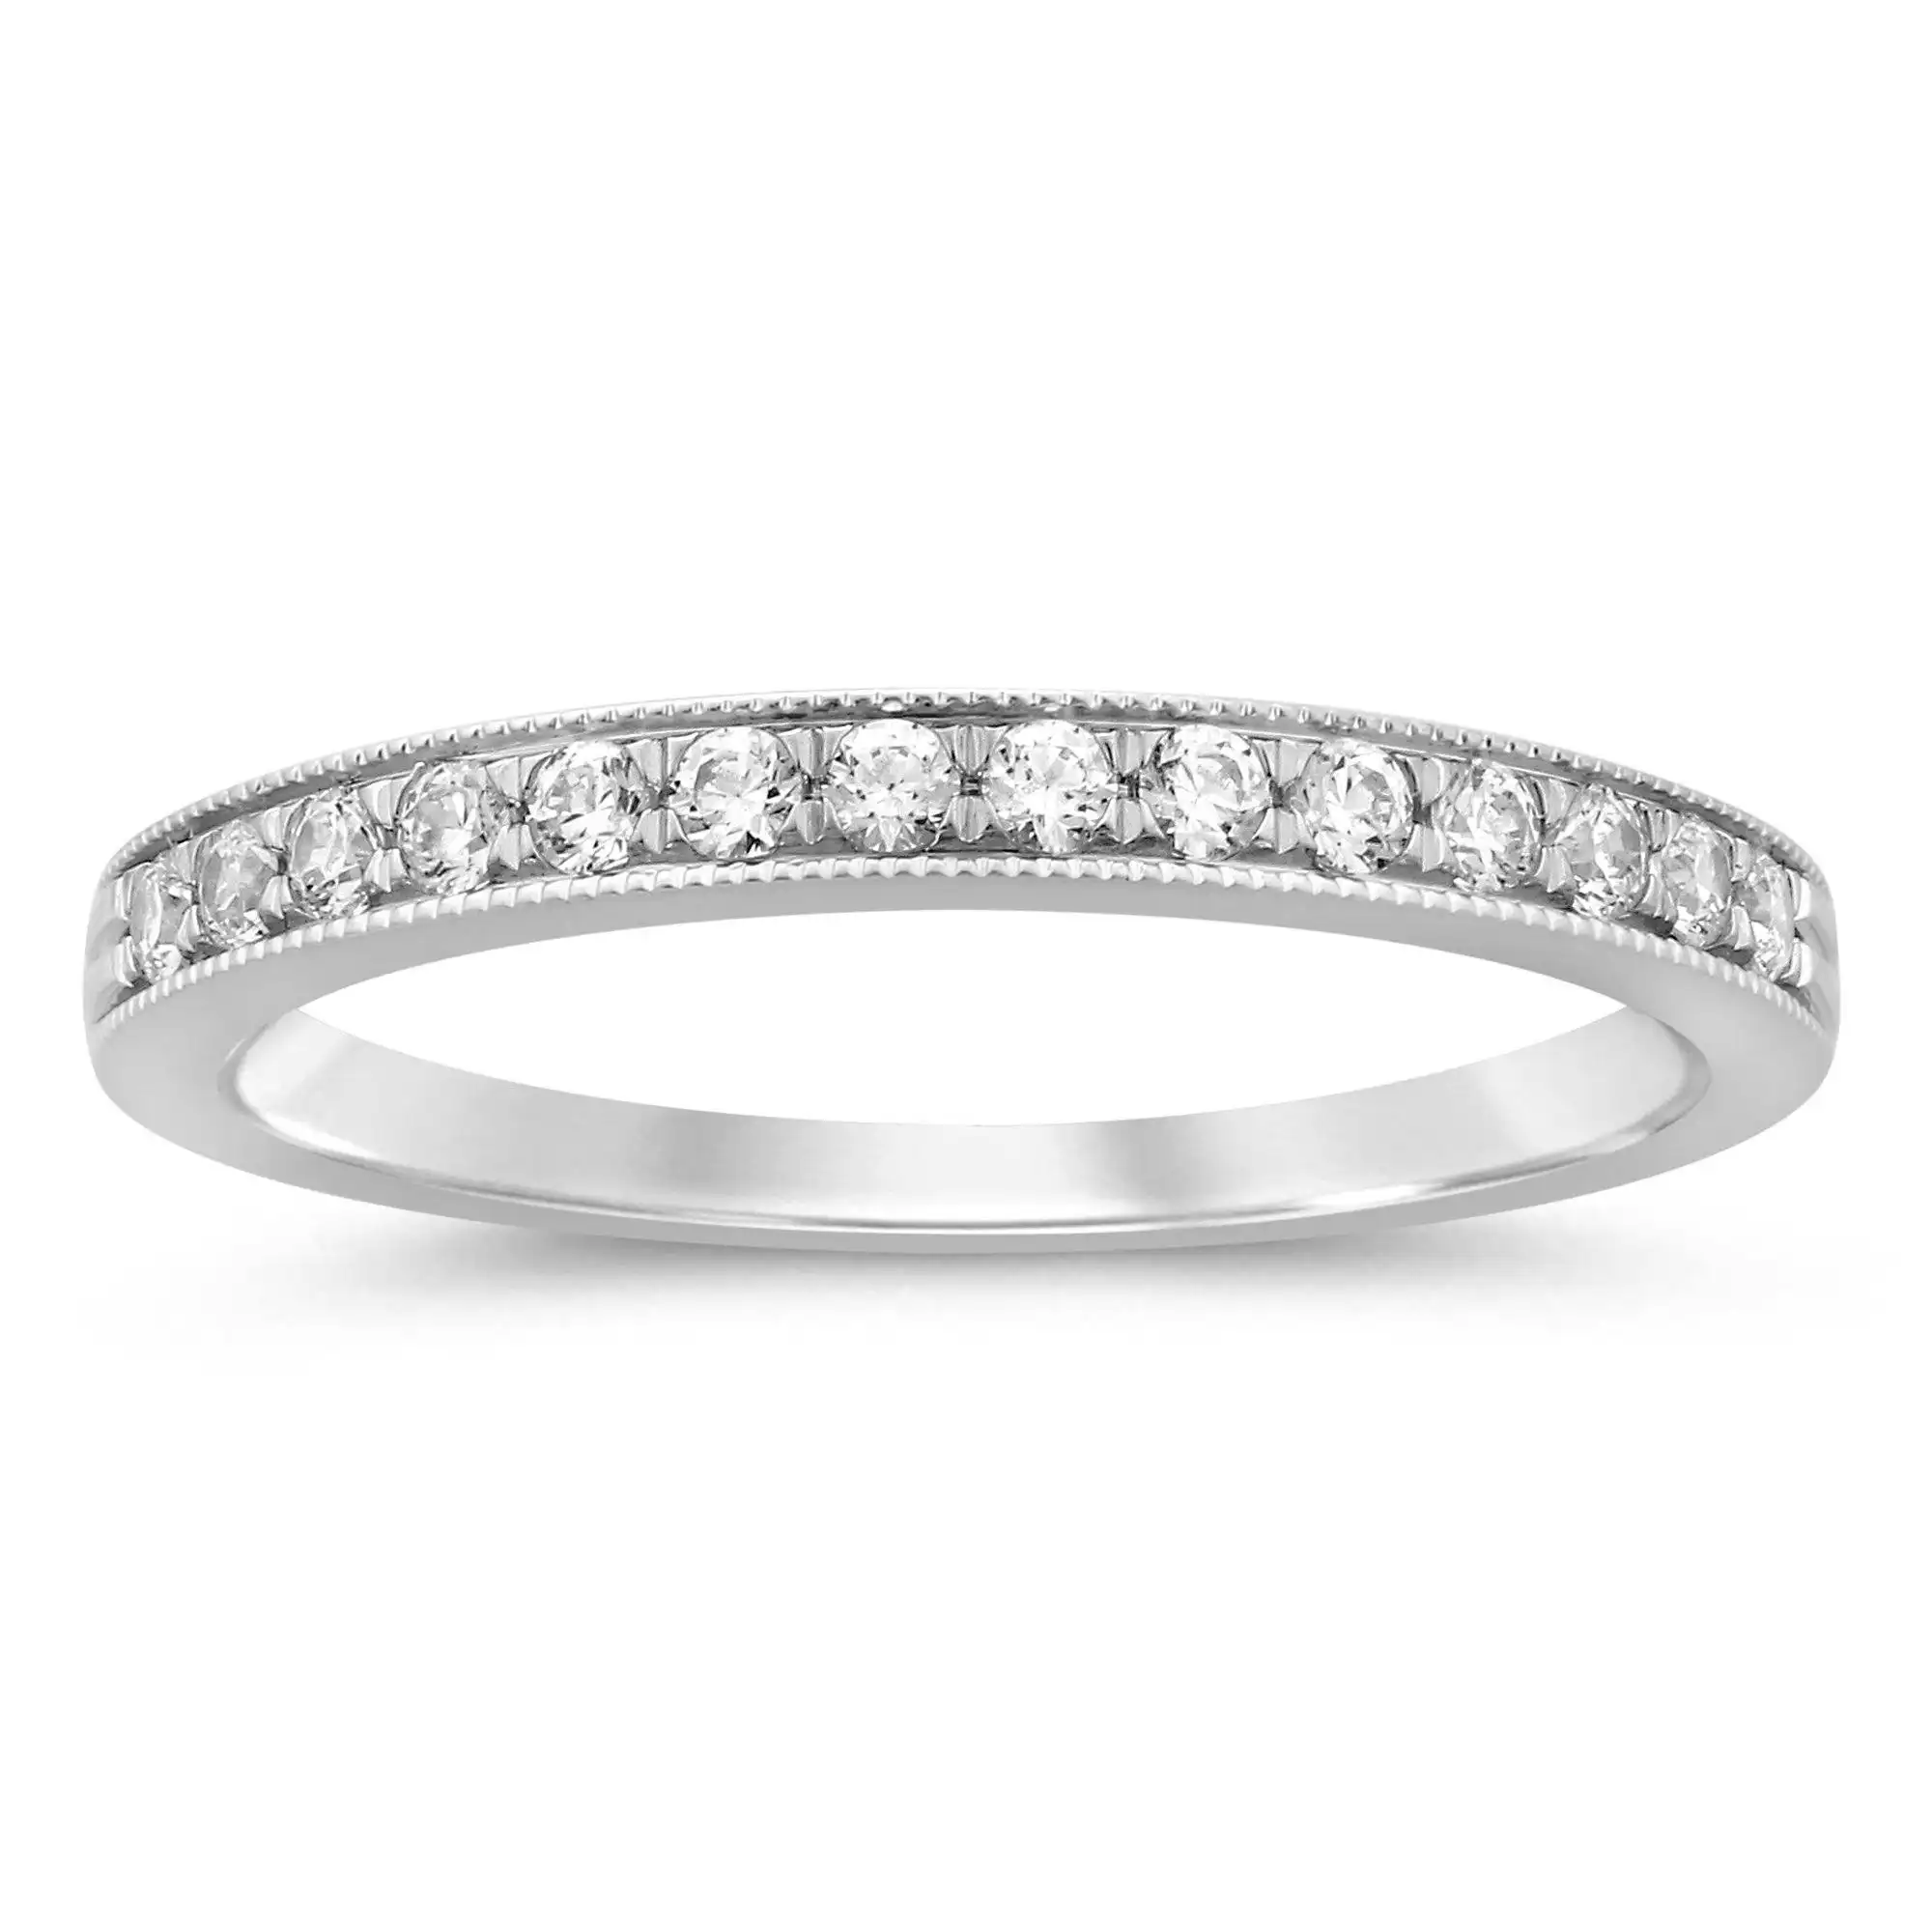 Grain Eternity Ring with 1/4ct of Diamonds in 9ct White Gold